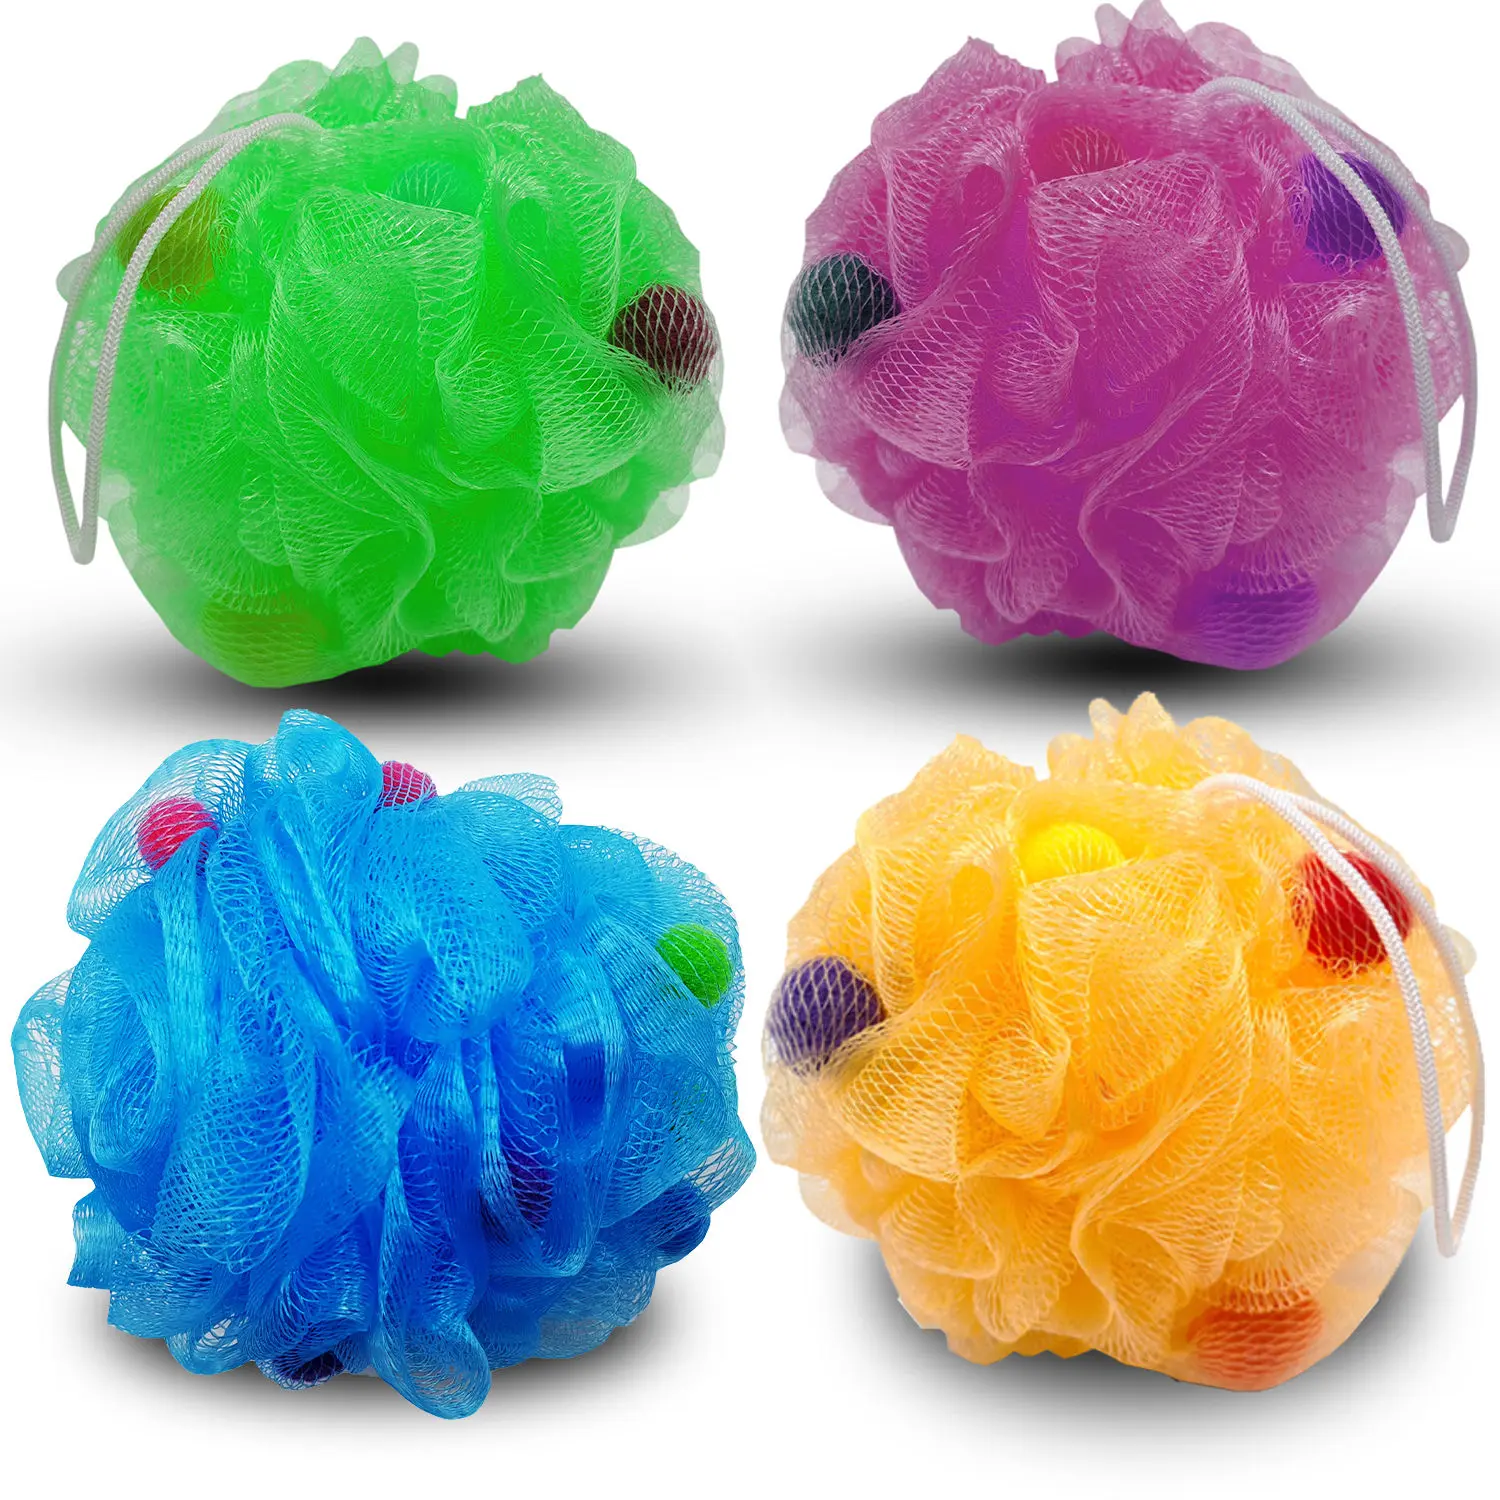 Majestique Shower Puff Bath Sponge Loofah - Shower Essential Skin Care 4Pcs - Color May Vary